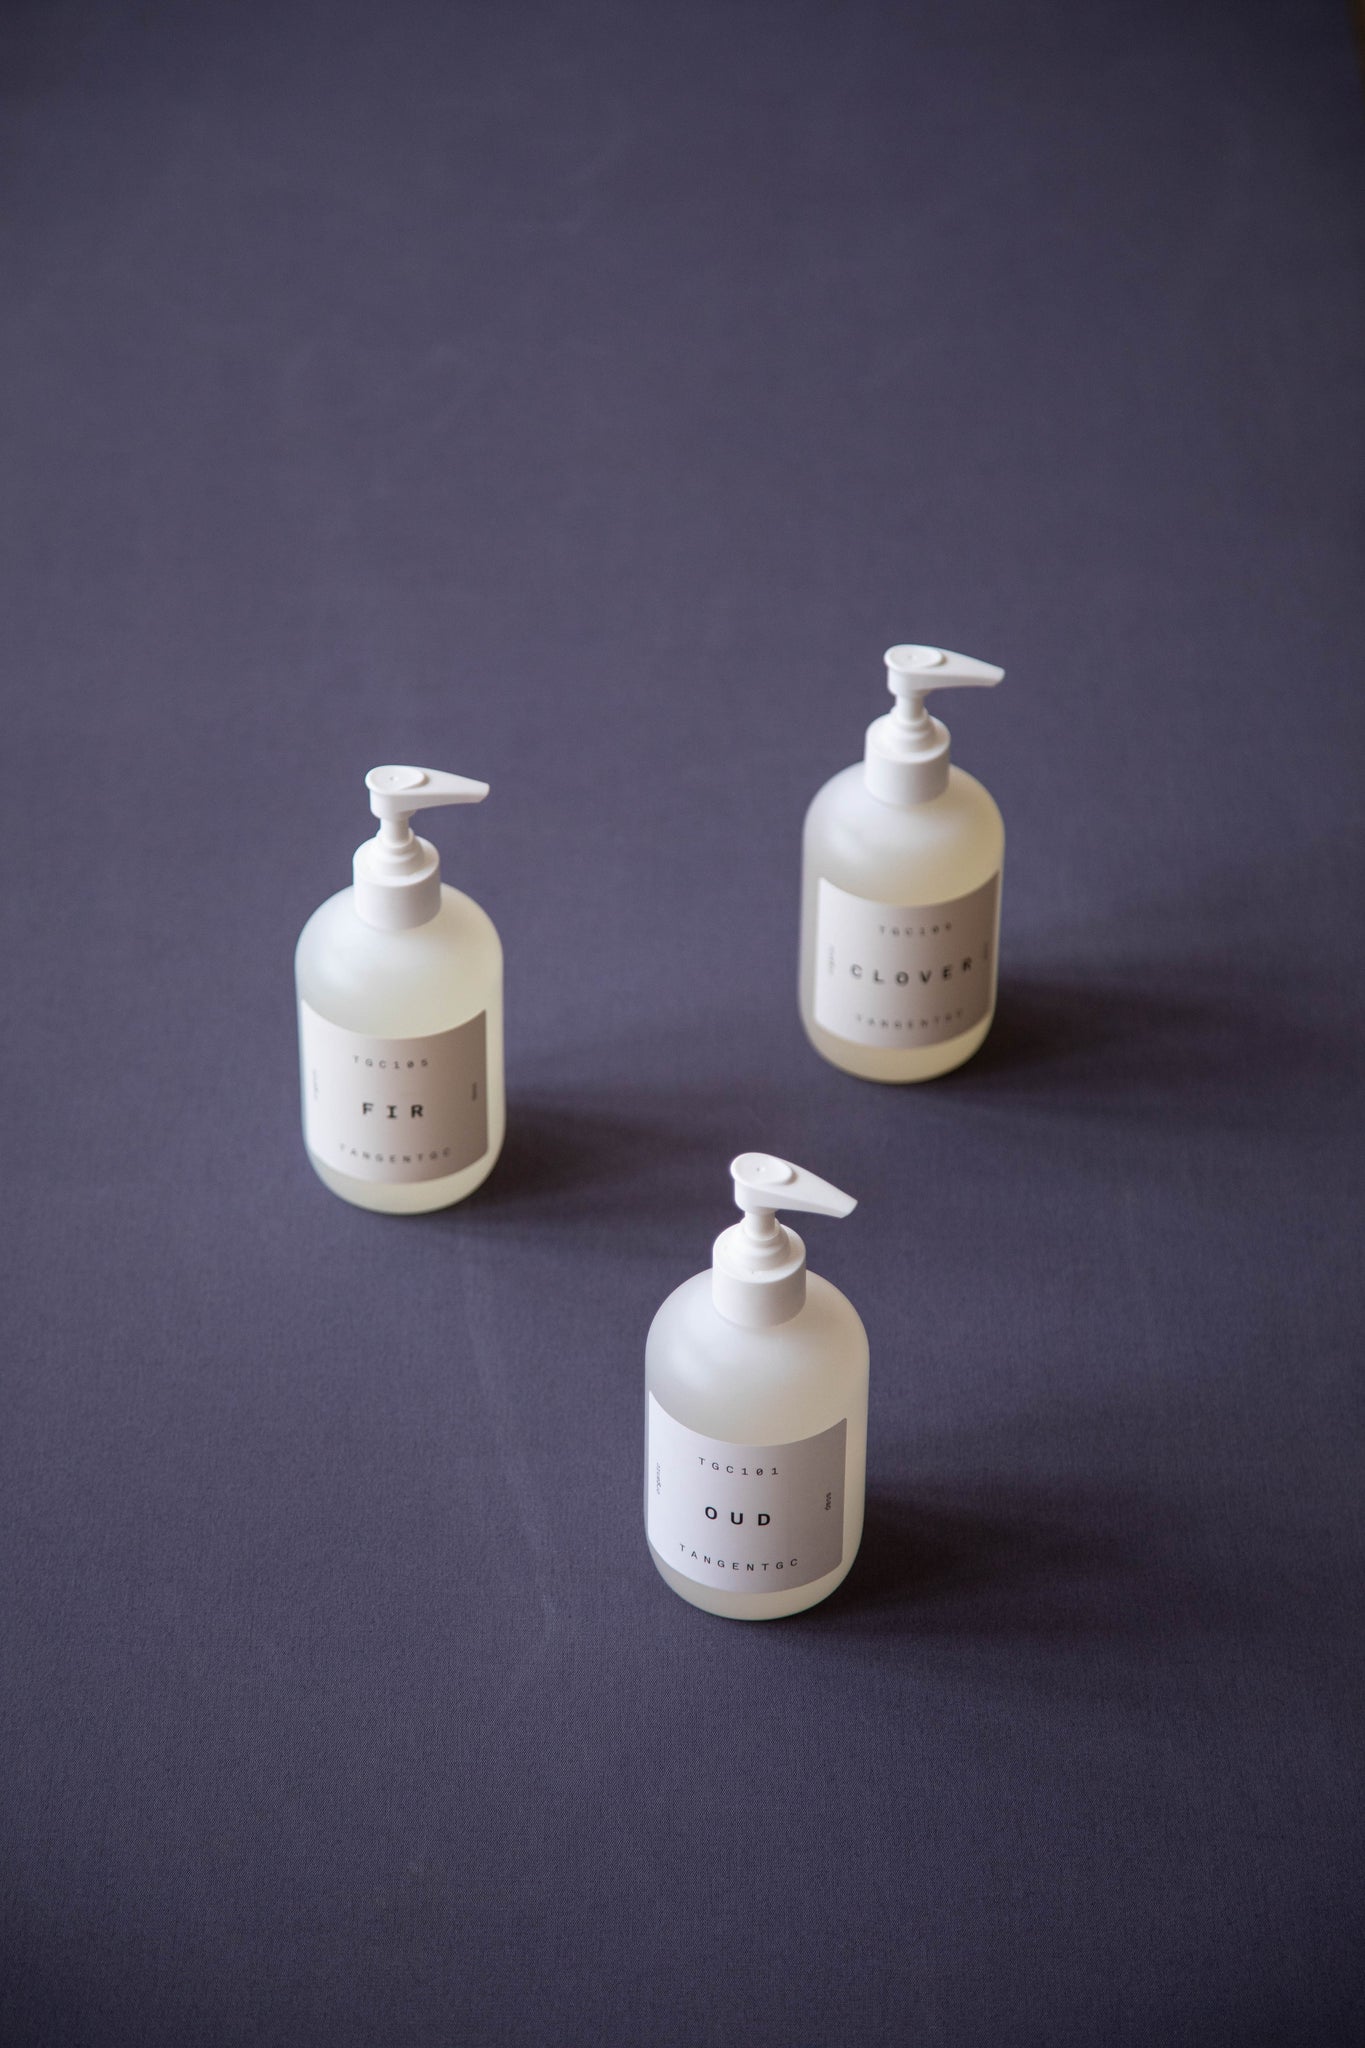 Tangent Hand Soap - Multiple Scents